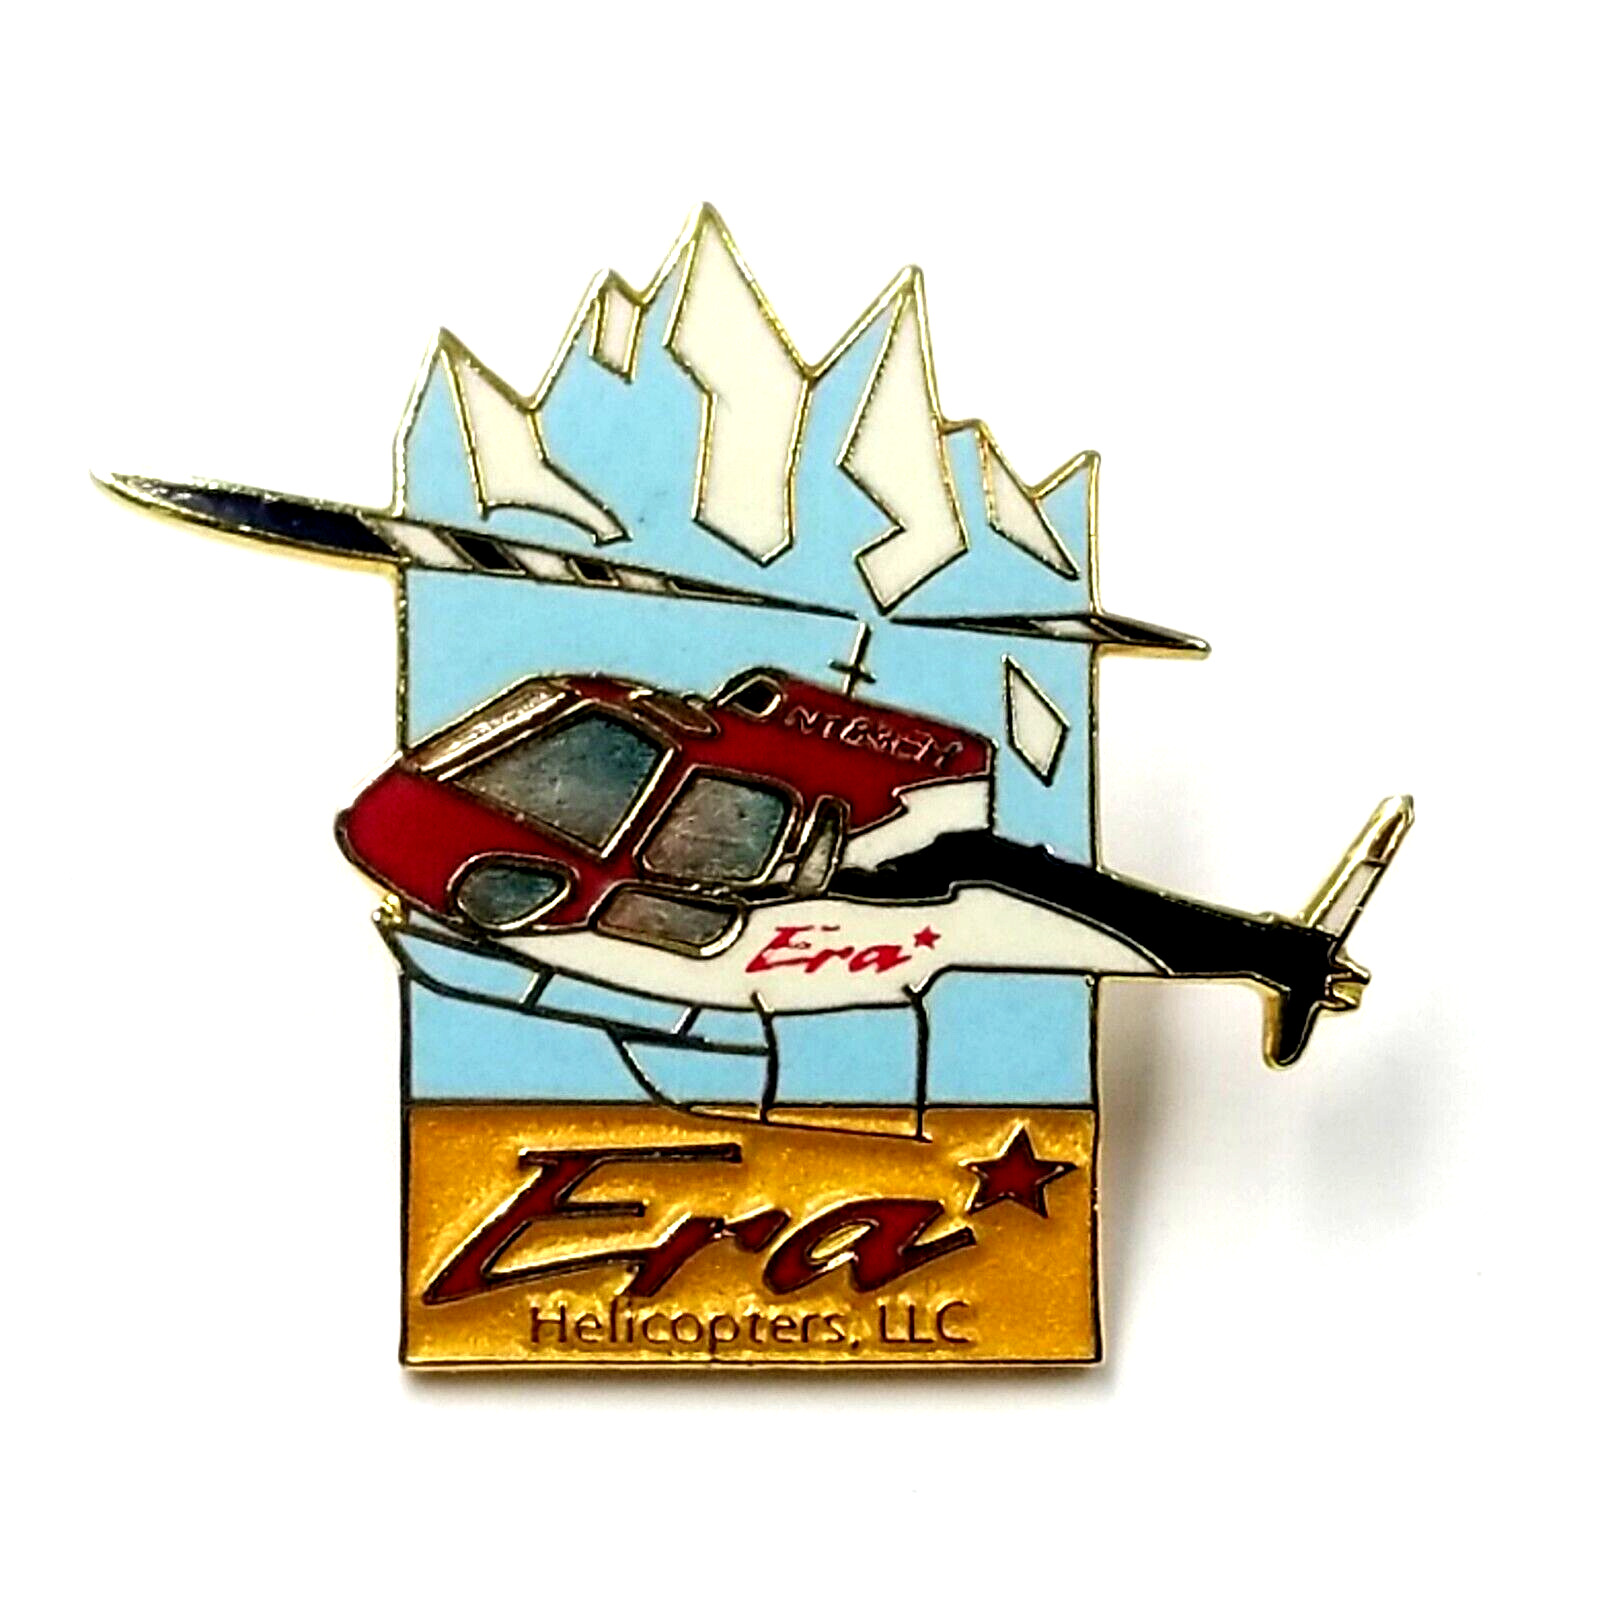 Era Economy Rotor Aids Helicopters Enamel Aircraft Lapel Pin Advertise Aviation